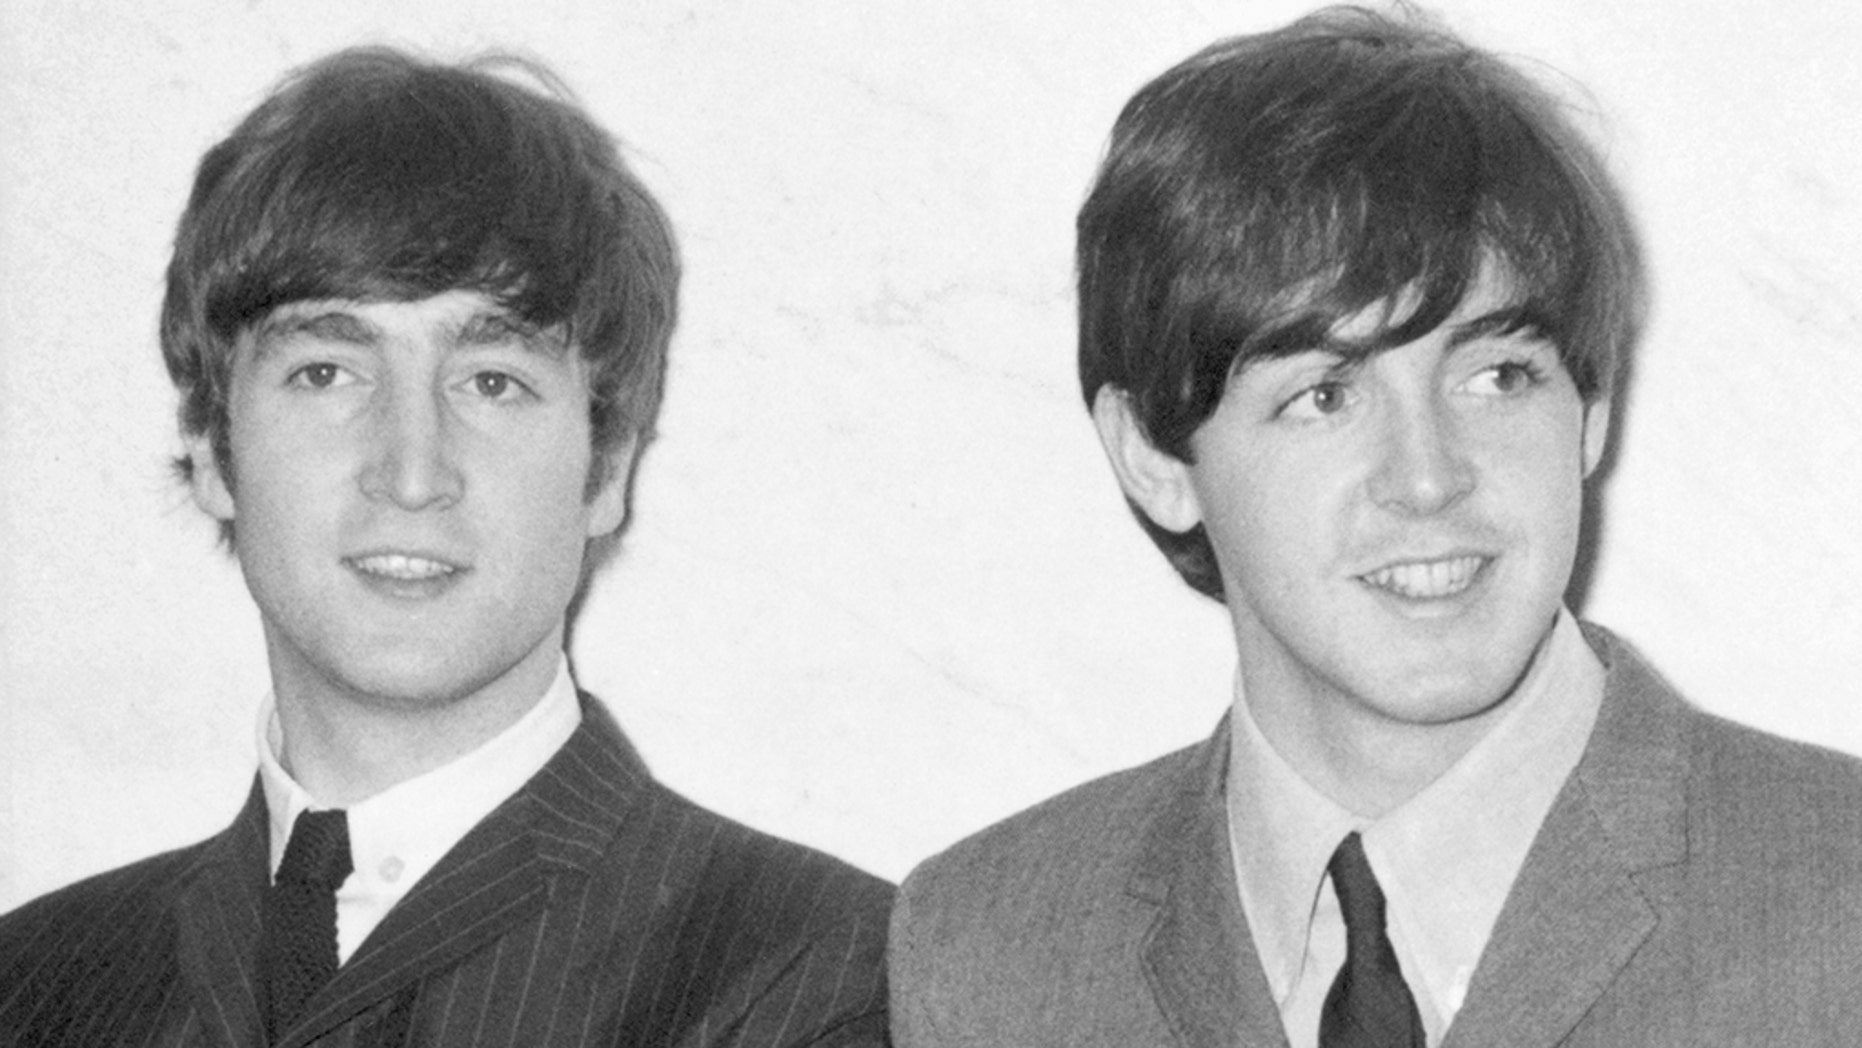 Paul McCartney claims John Lennon liked only 1 of his ...